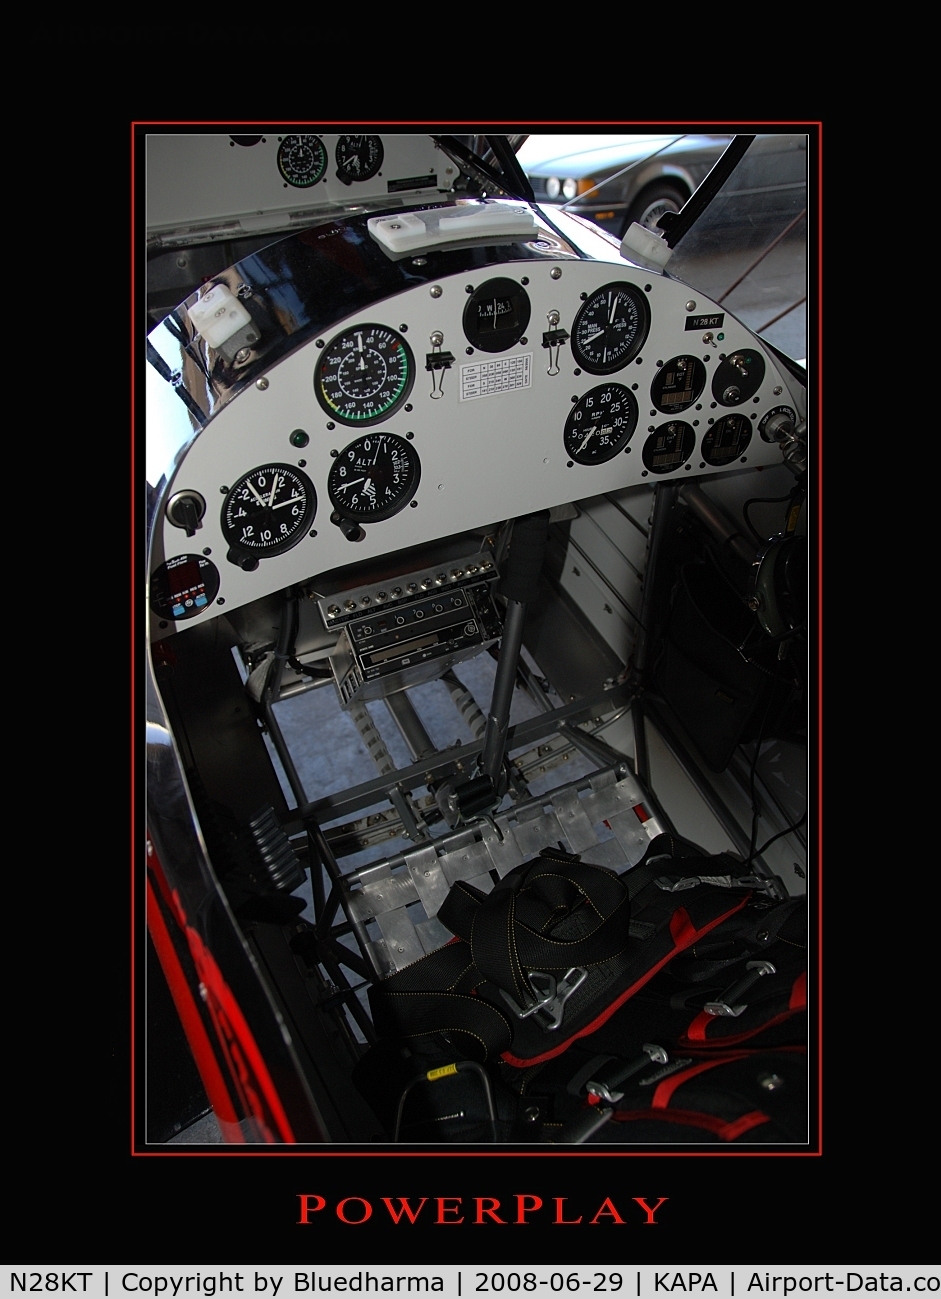 N28KT, 2005 Stolp SA-750 Acroduster Too C/N 0028, View of Power Play backseat control panel.